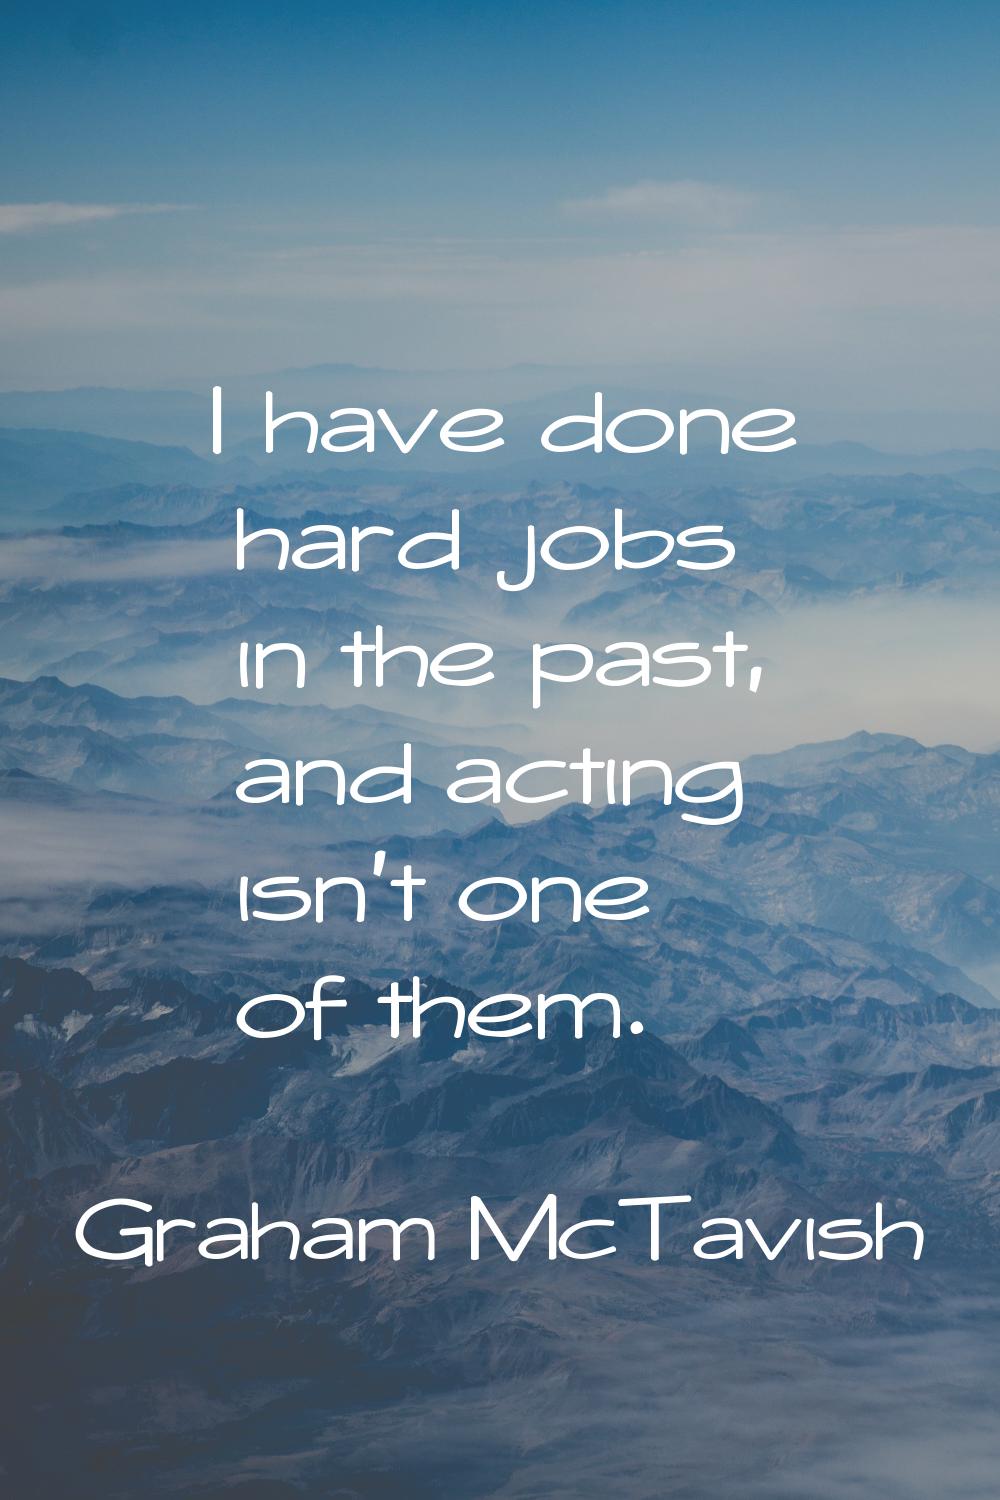 I have done hard jobs in the past, and acting isn't one of them.